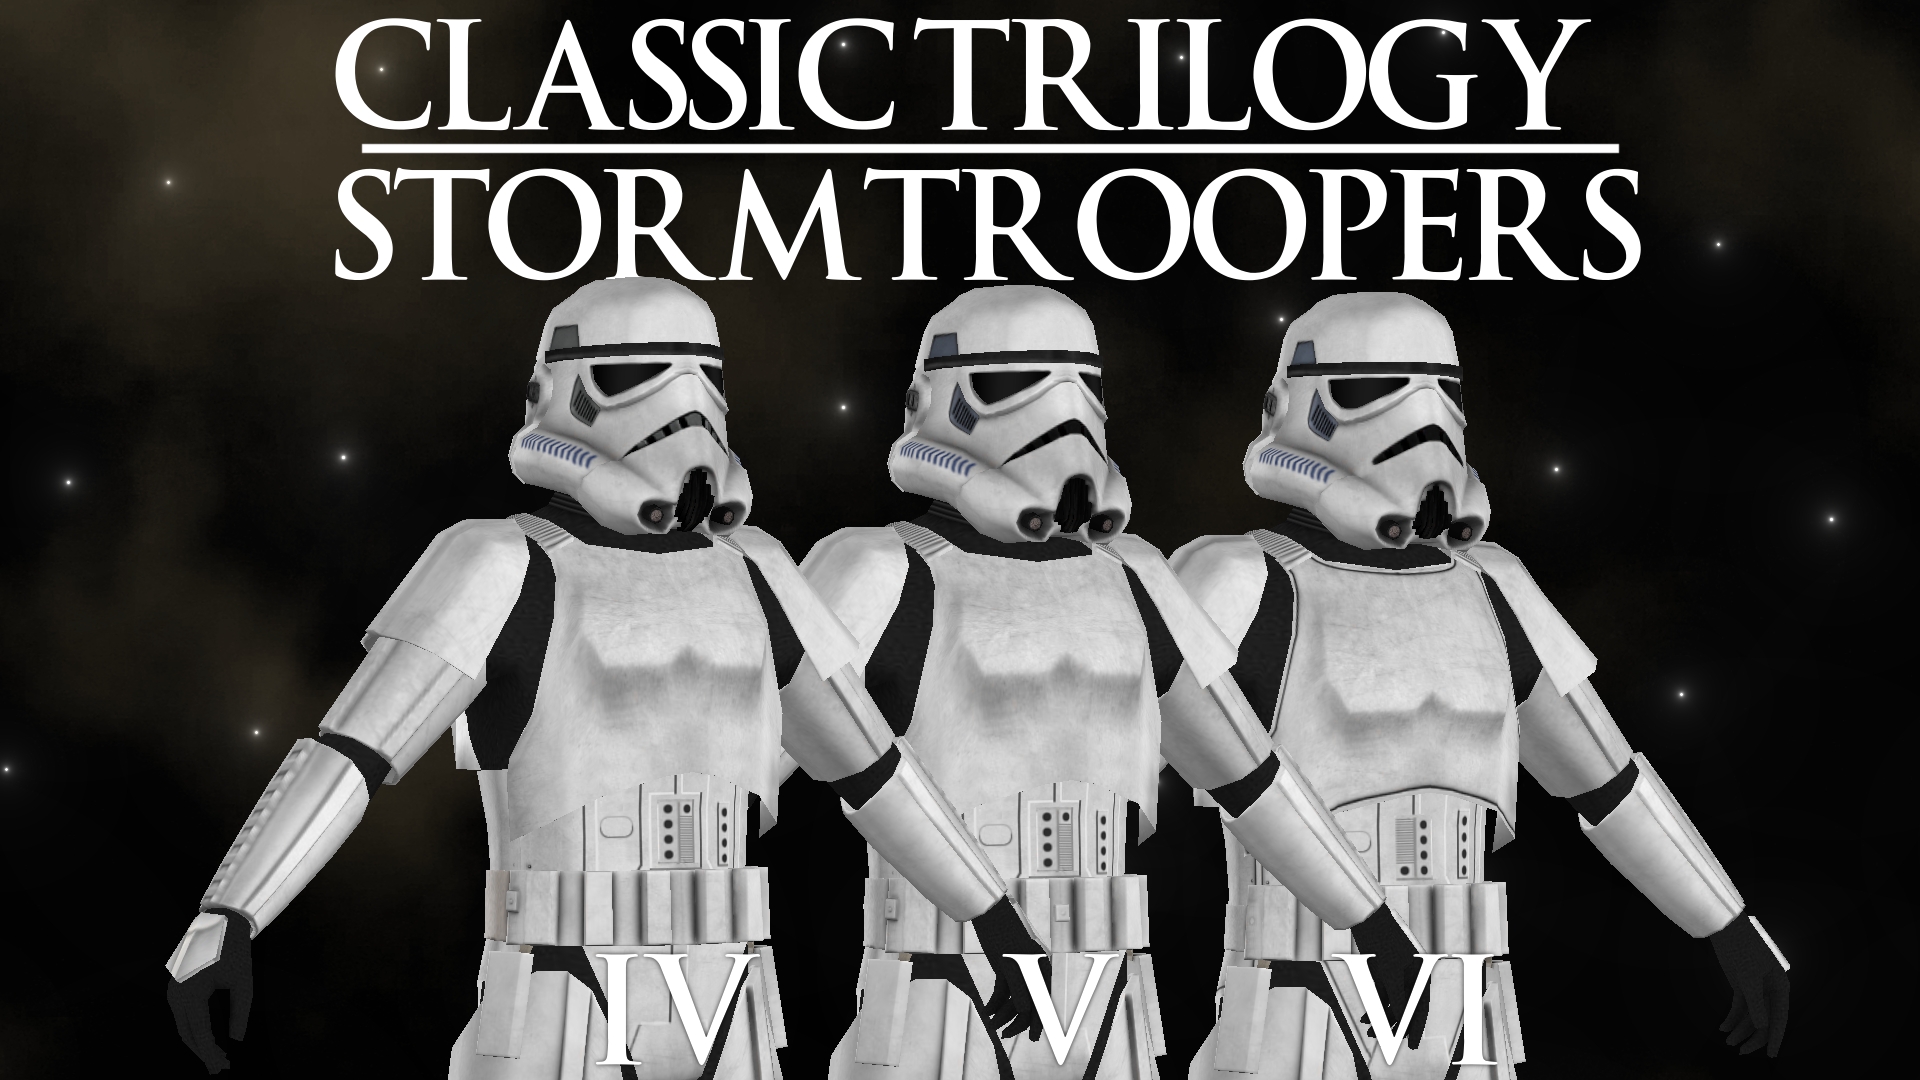 More information about "Classic Trilogy Stormtroopers"